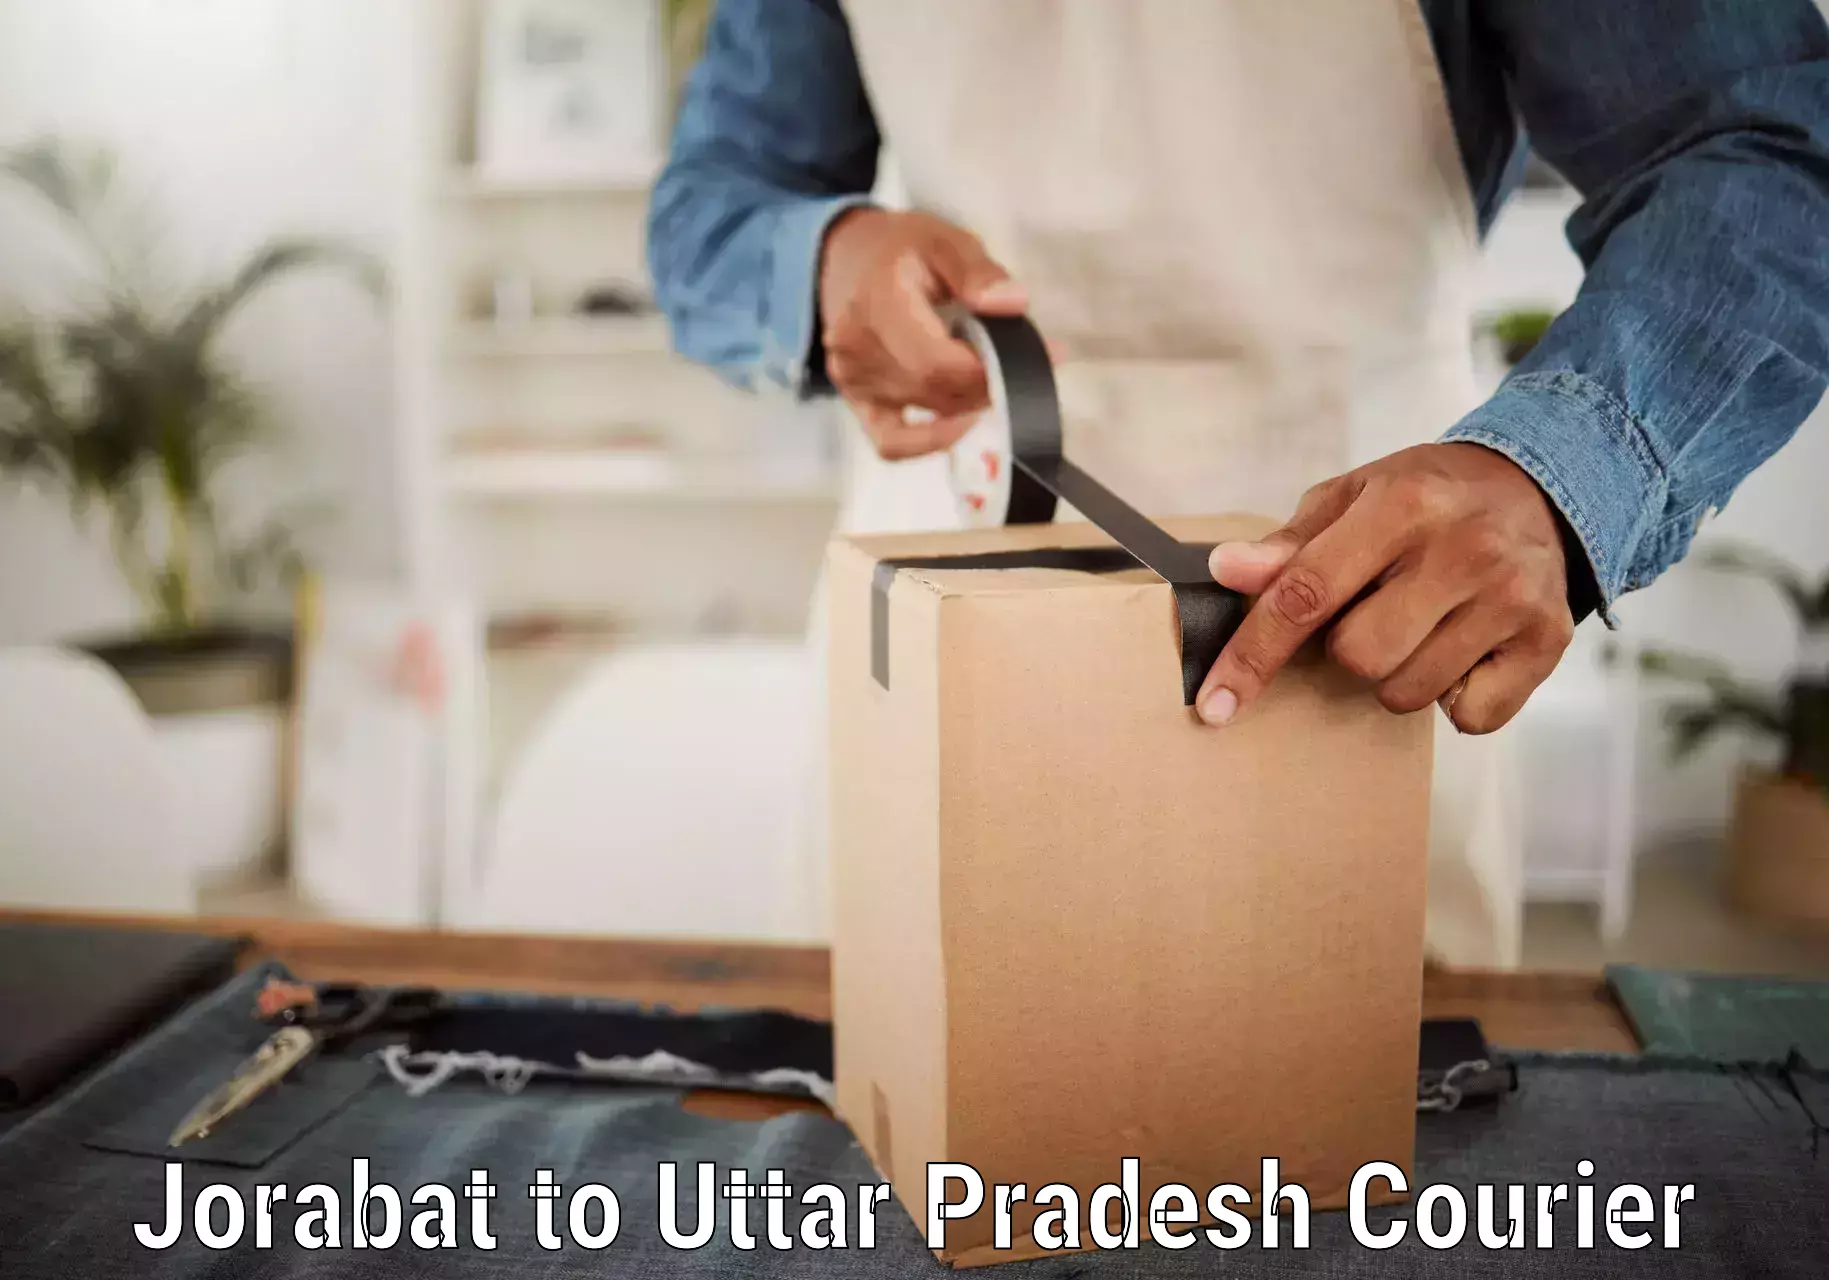 Reliable parcel services in Jorabat to Sirathu